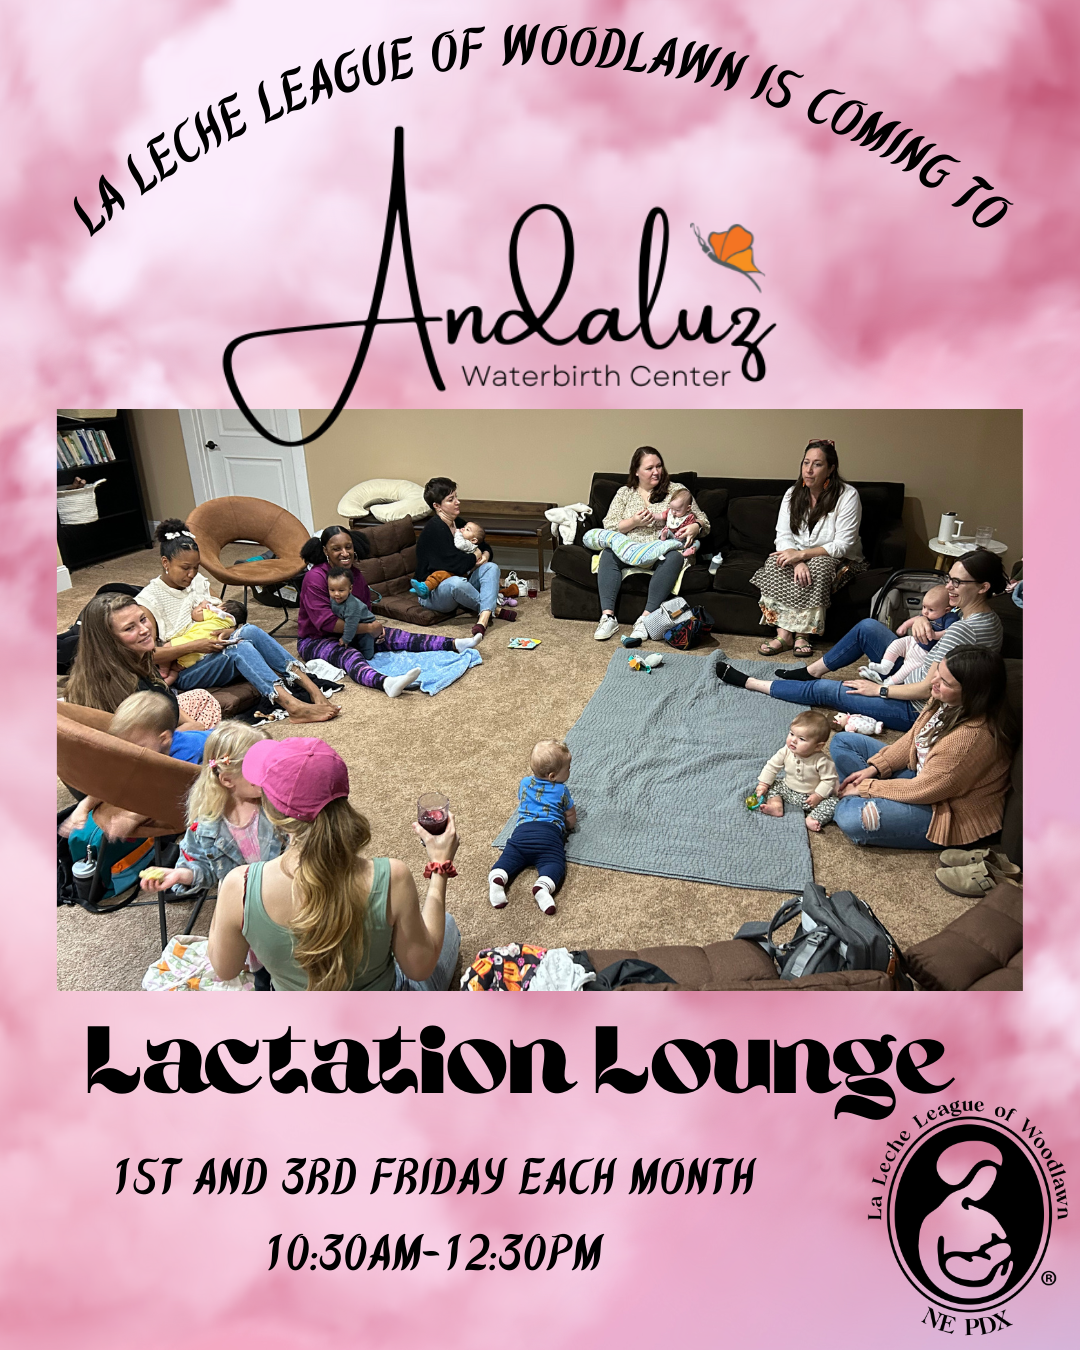 Lactation Lounge at Andaluz STARTING IN MAY